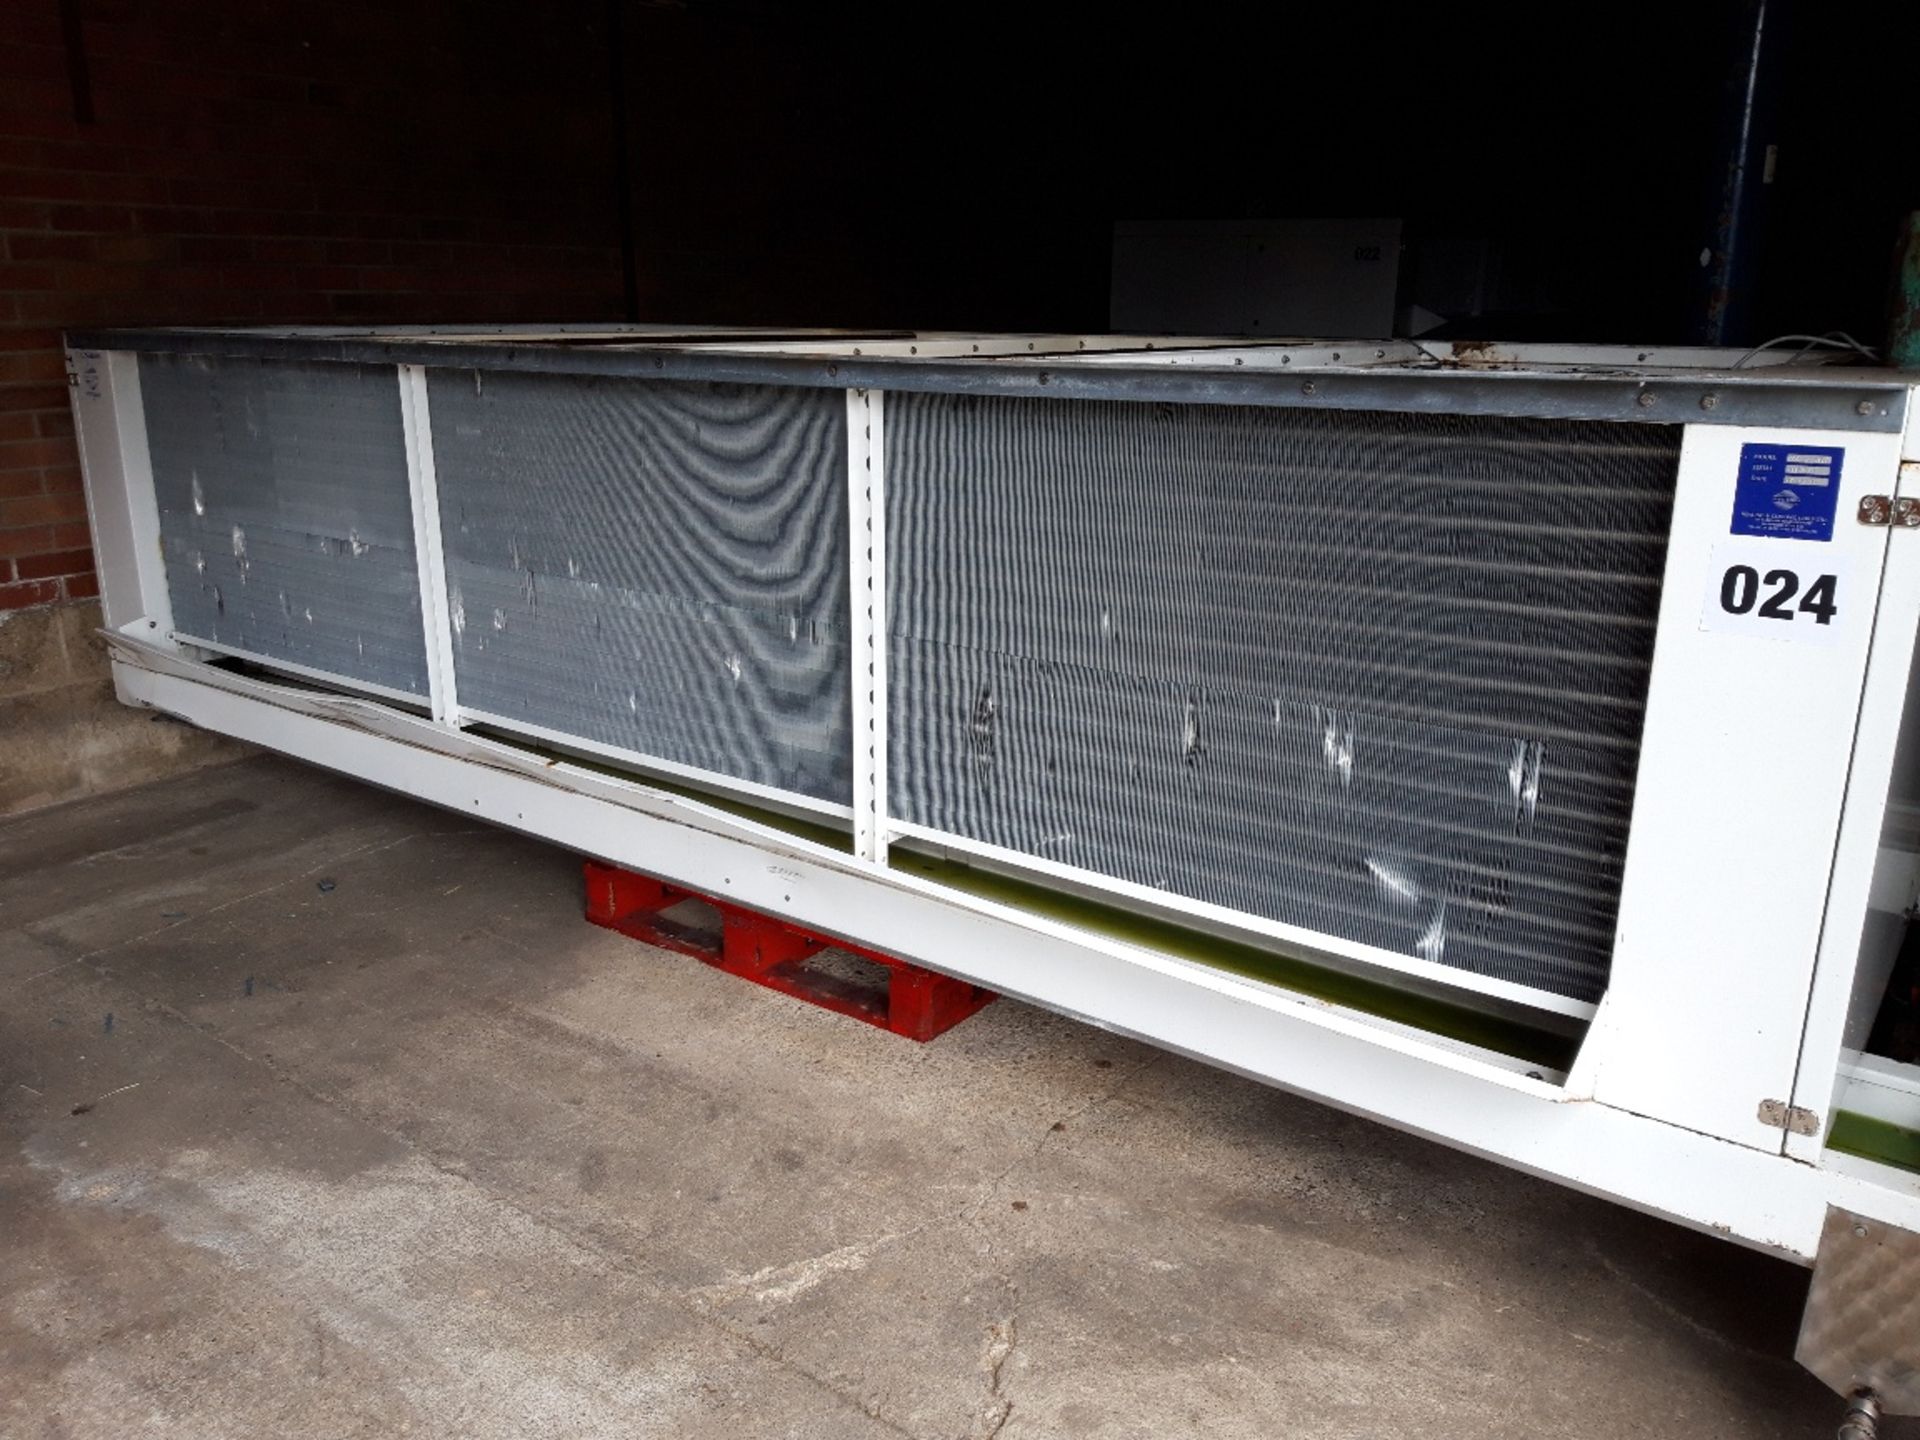 Evaporator Model DDL 6 - 180 by Heating + Cooling Coils. Lift out £80was working in factory.